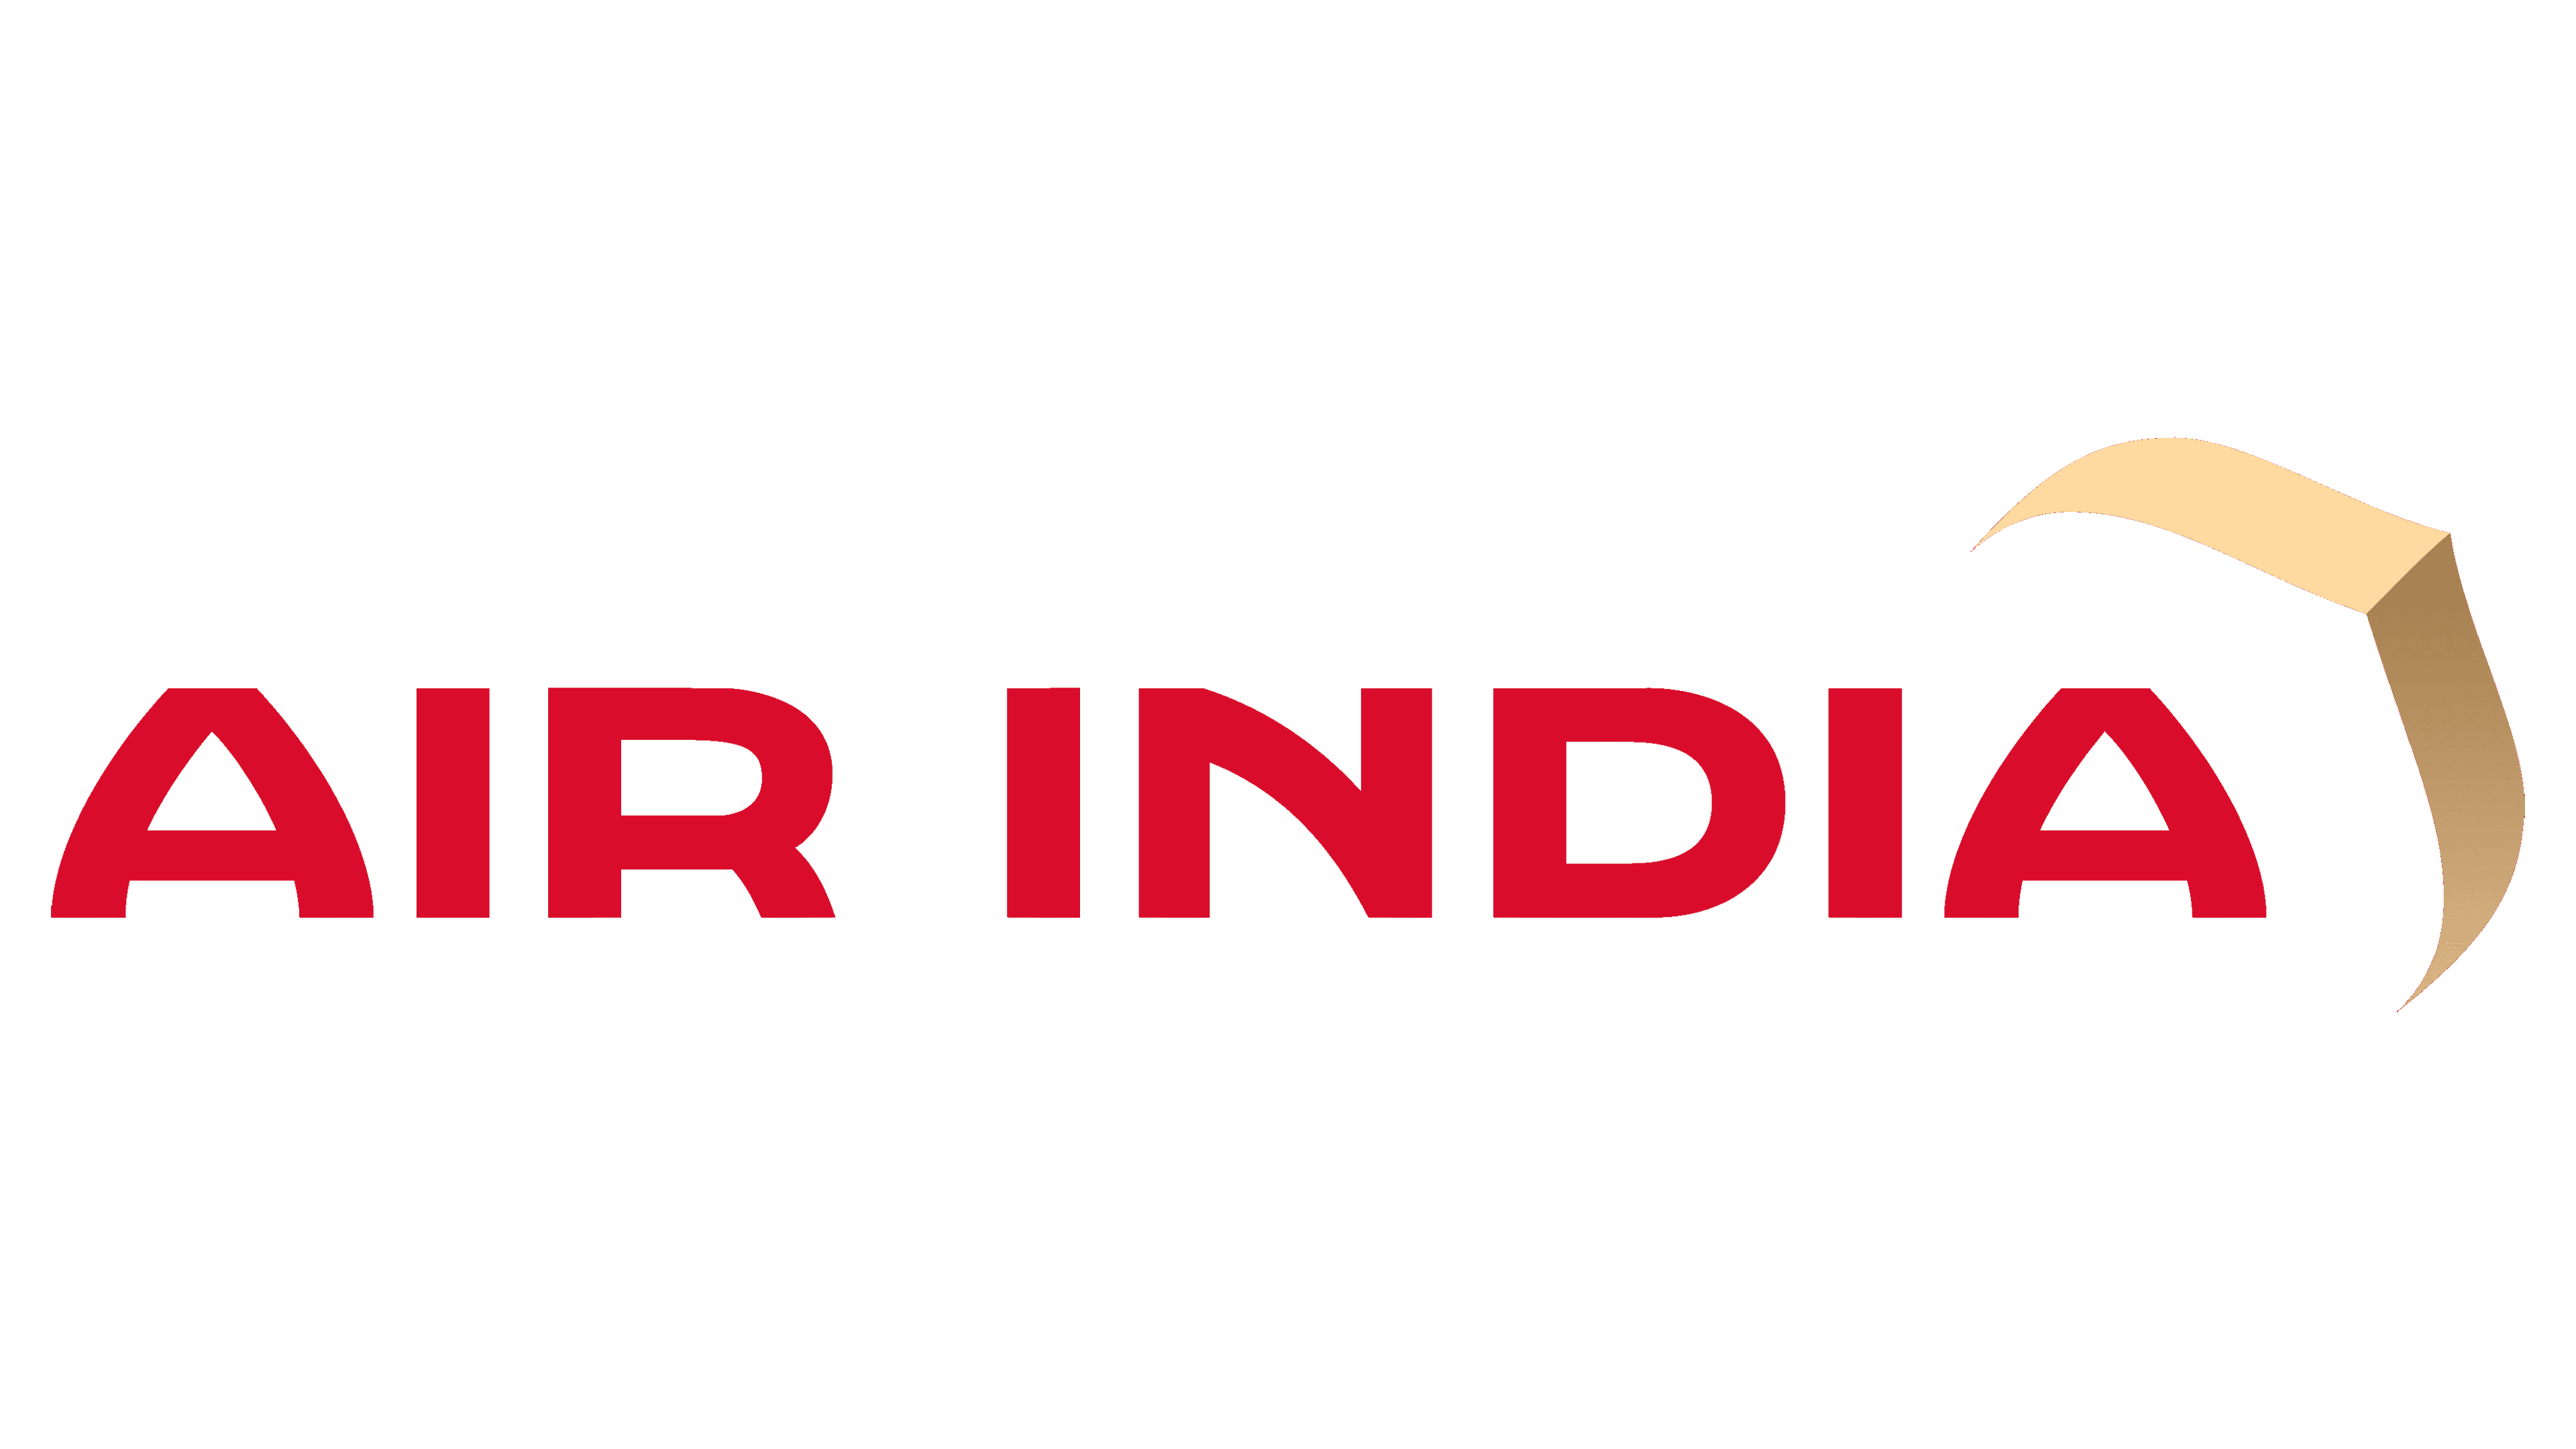 Air Tickets in India: Logos of Airline Companies